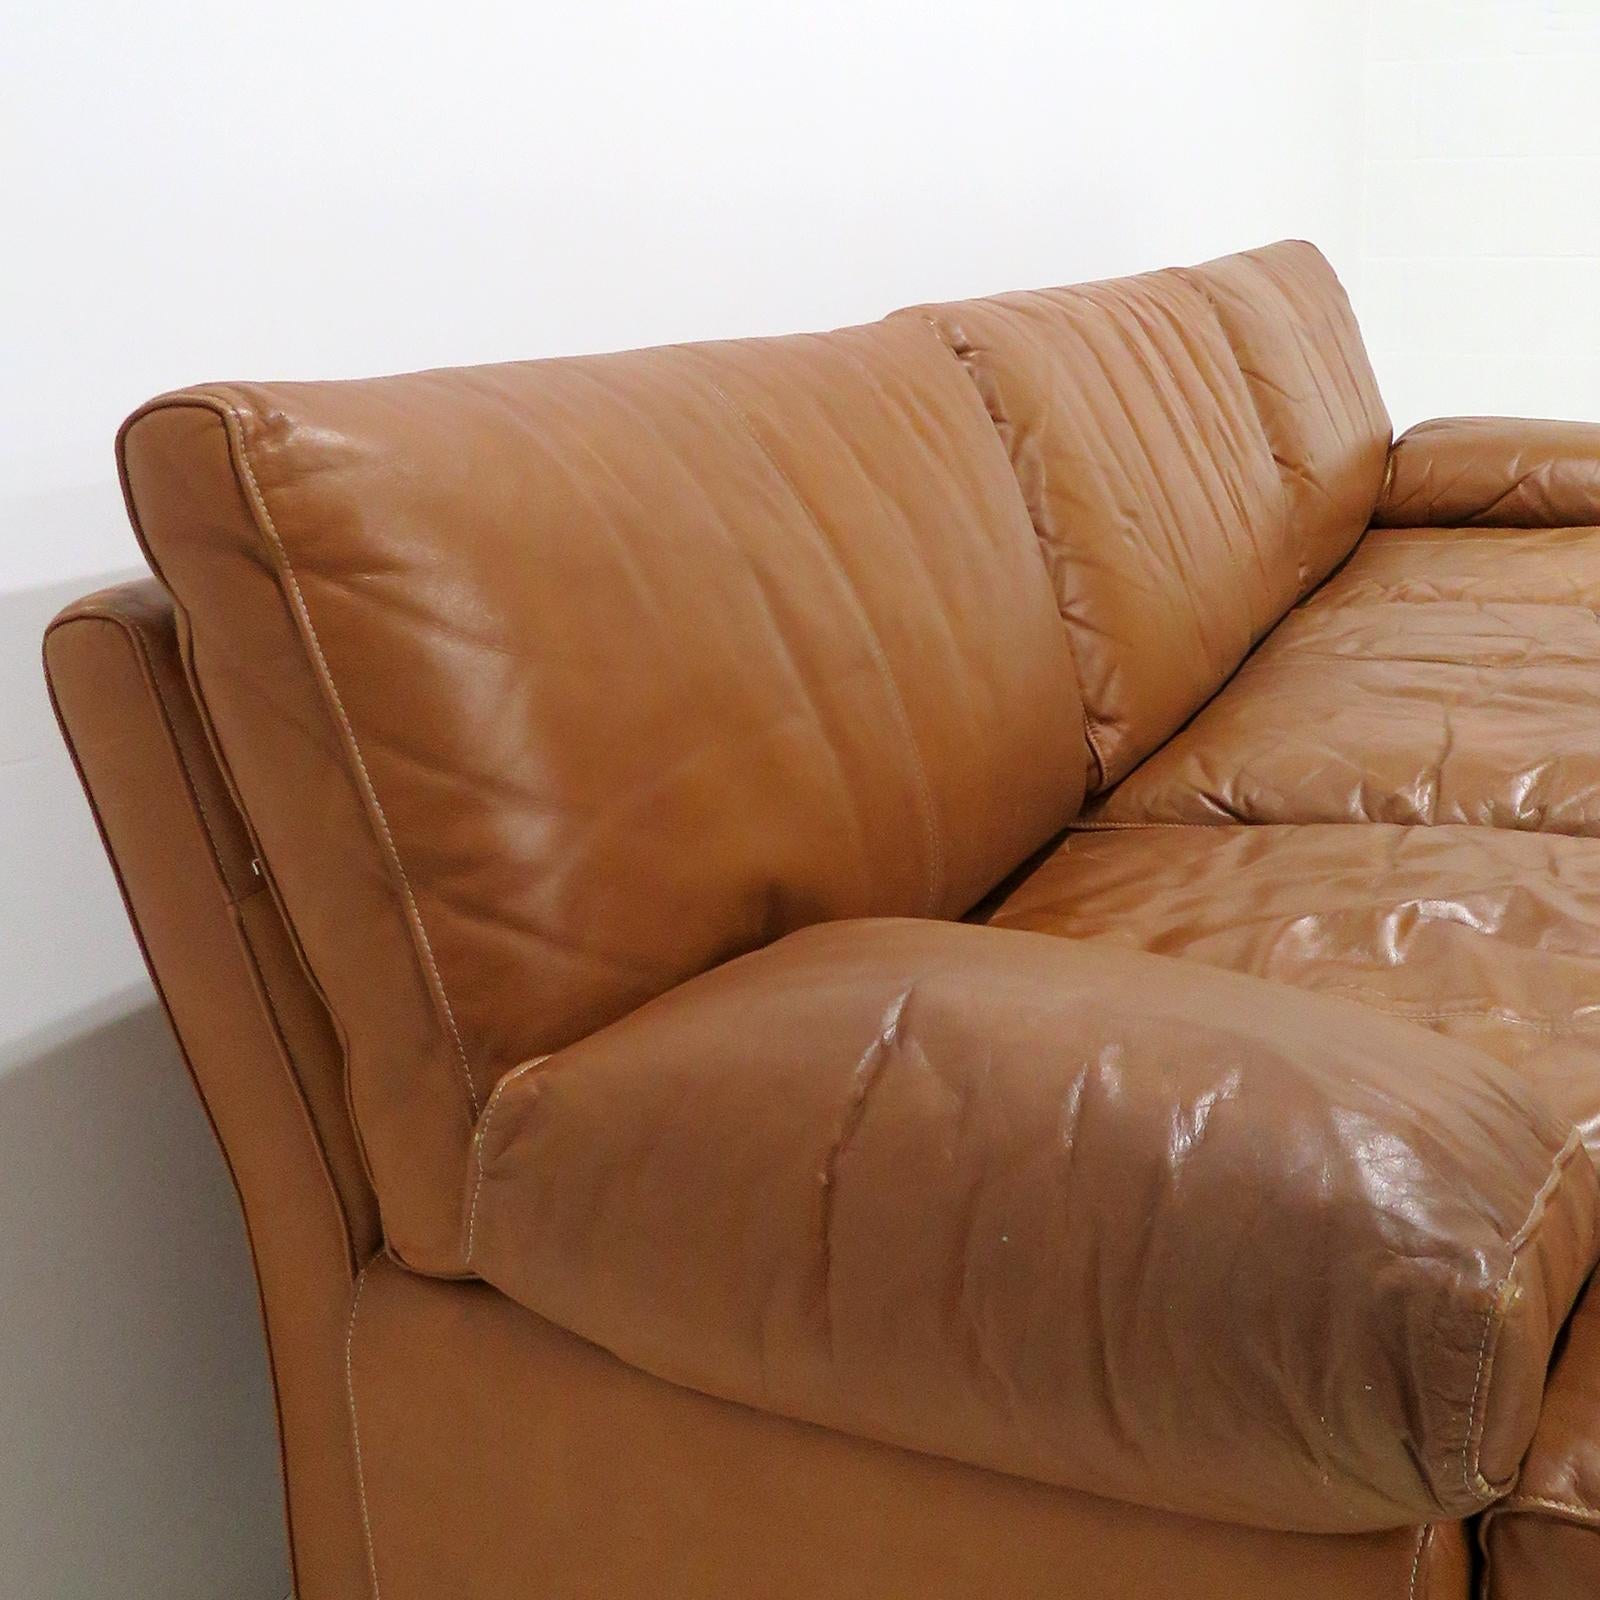 Finnish Modular Leather Sofa by BJ Dahlquist, 1970 For Sale 3